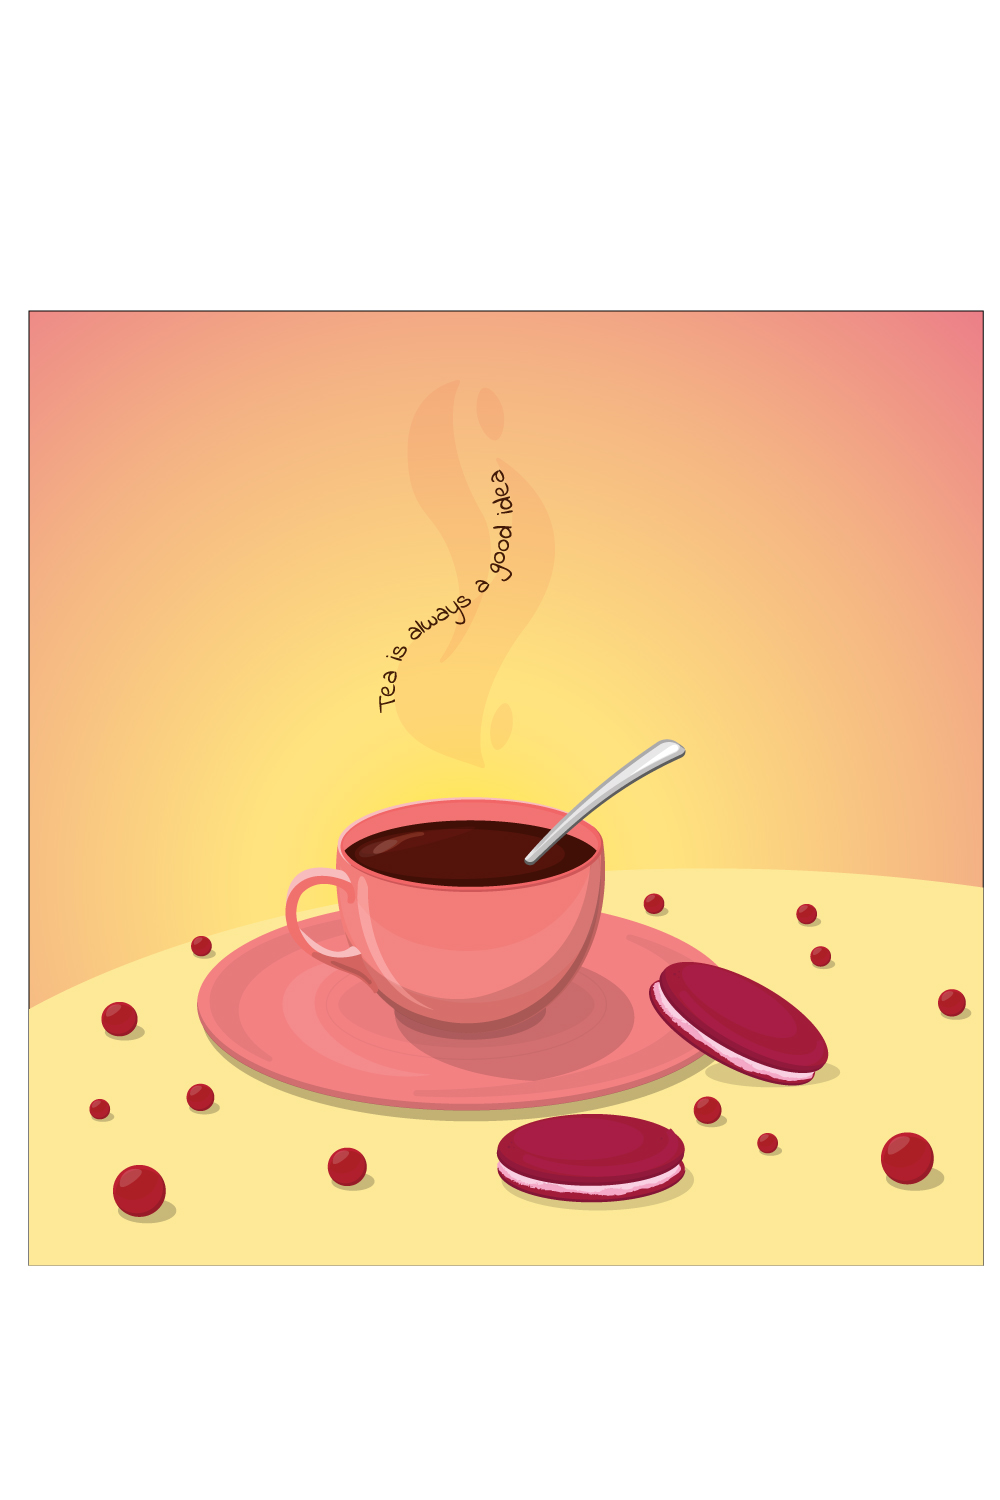 A cup of tea with macarons and berries pinterest preview image.